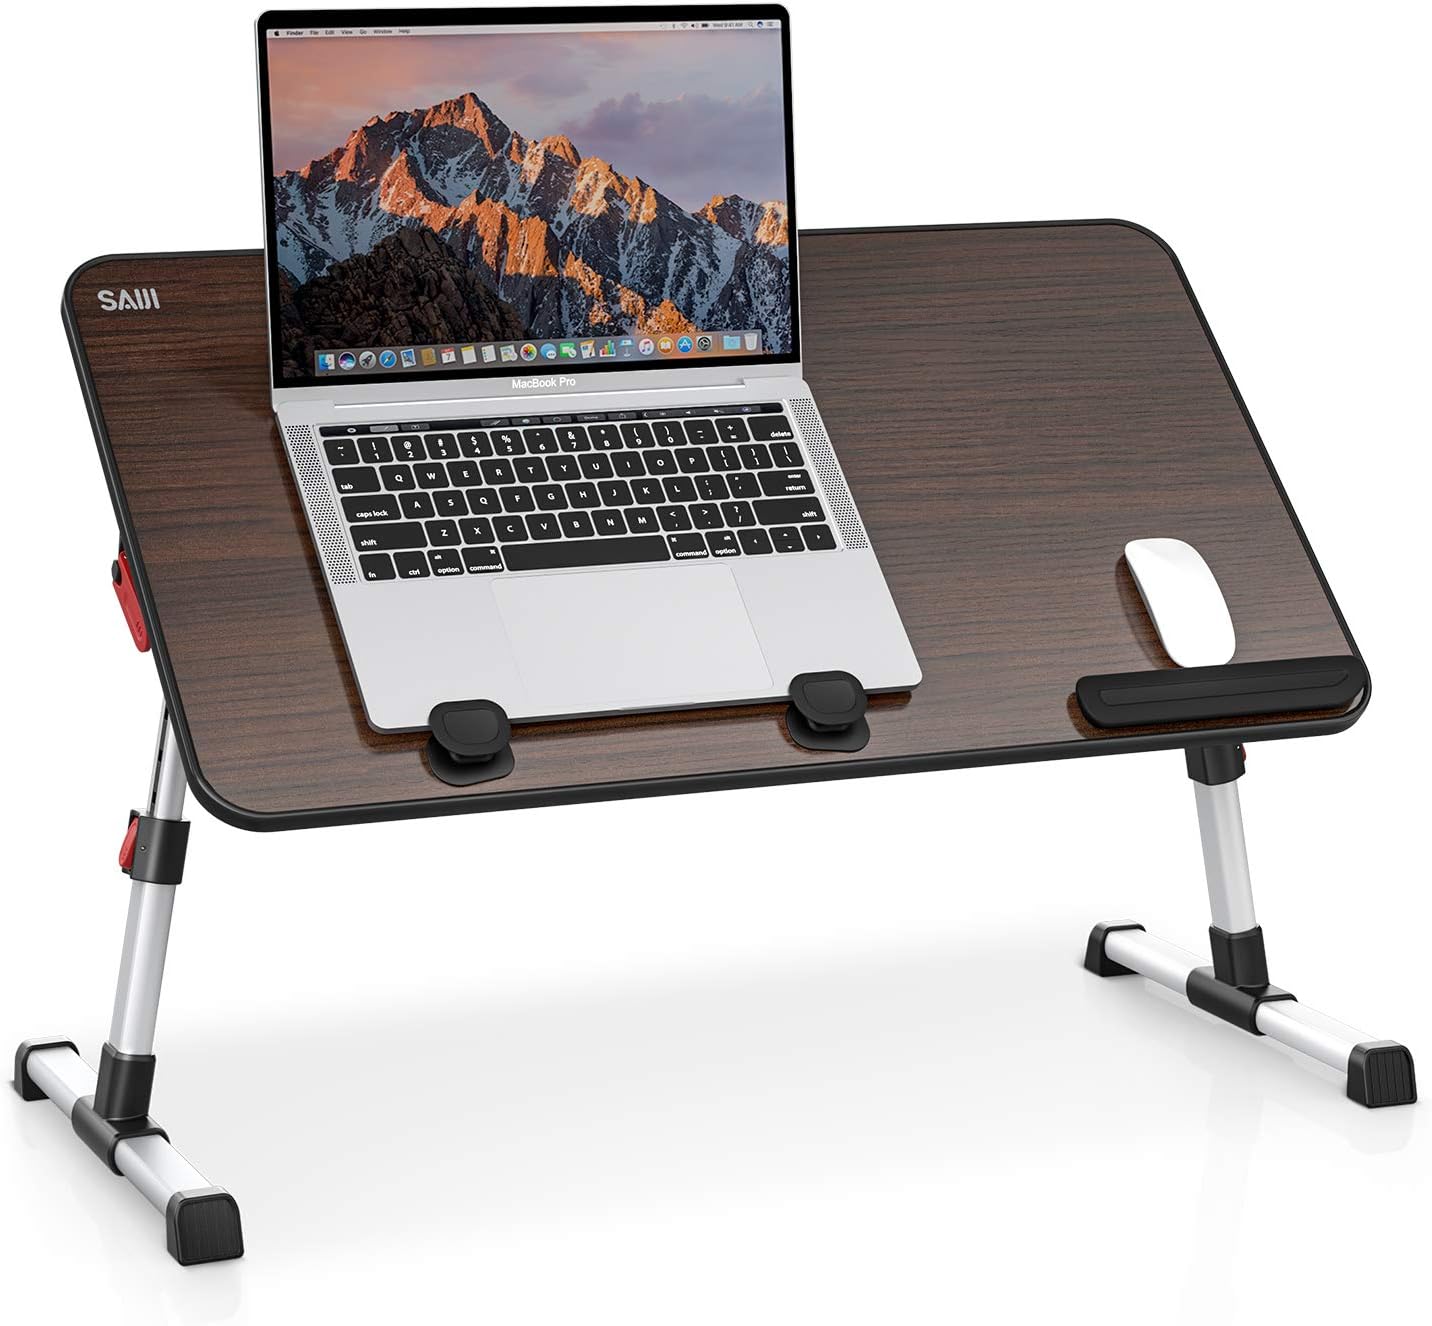 Laptop Stand Folding Computer Desk Table Adjustable Notebook Lap Tray For Bed Uk 